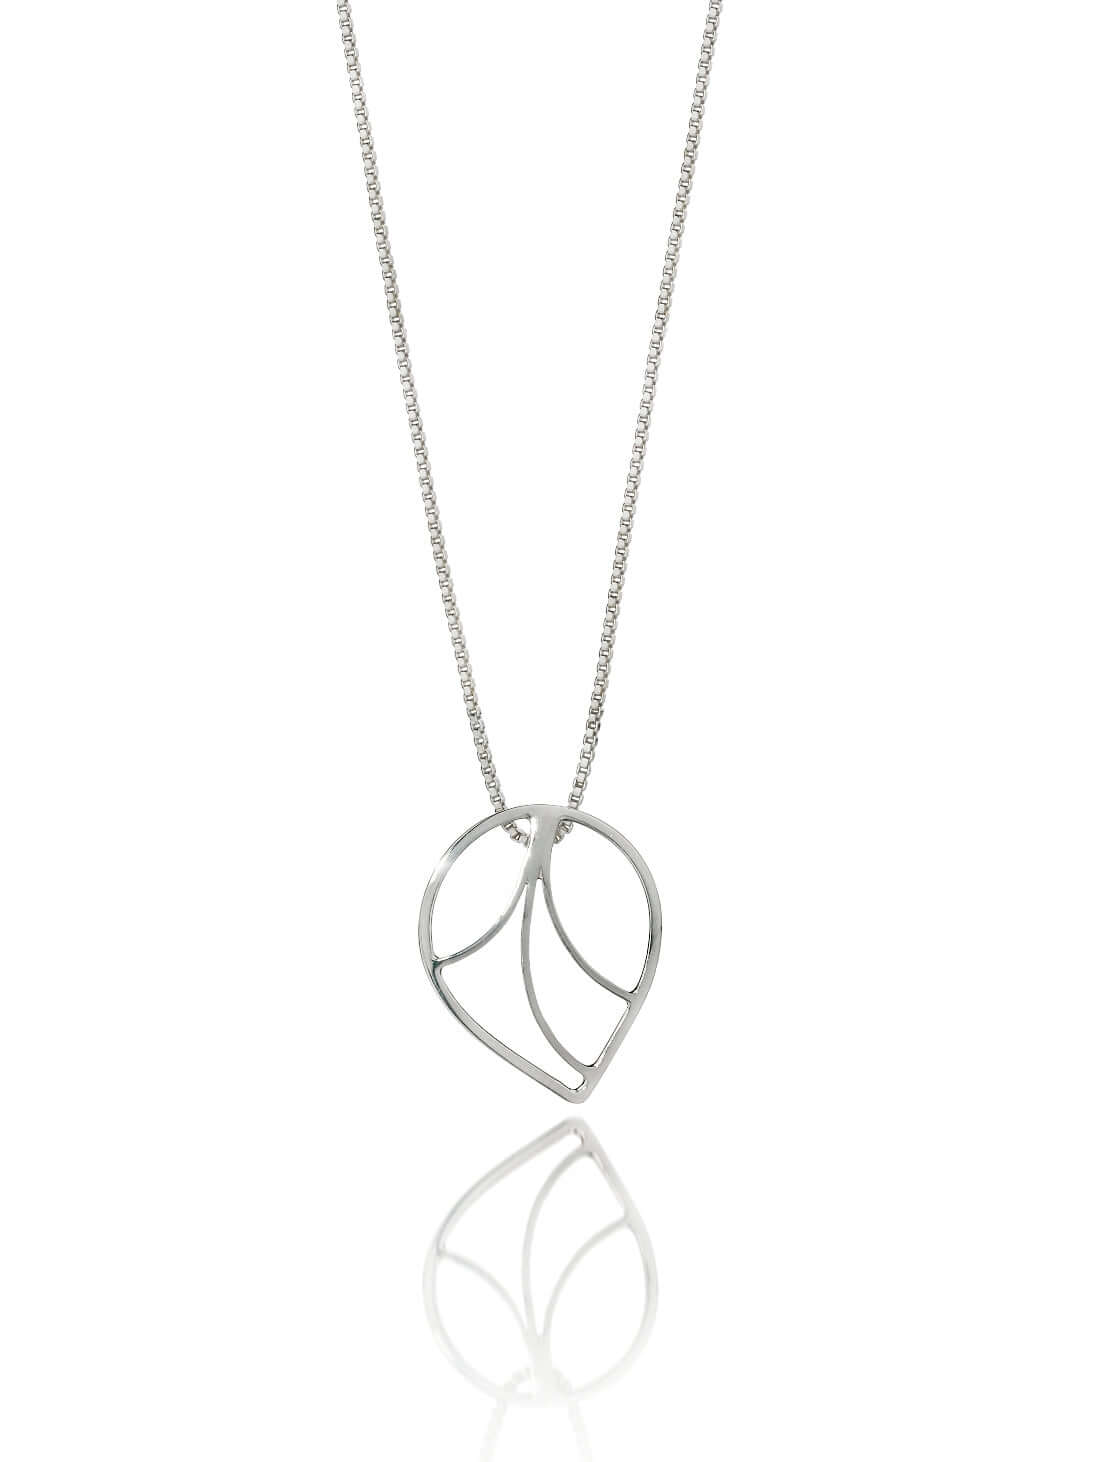 a handmade sterling silver seed pod necklace on a silver chain